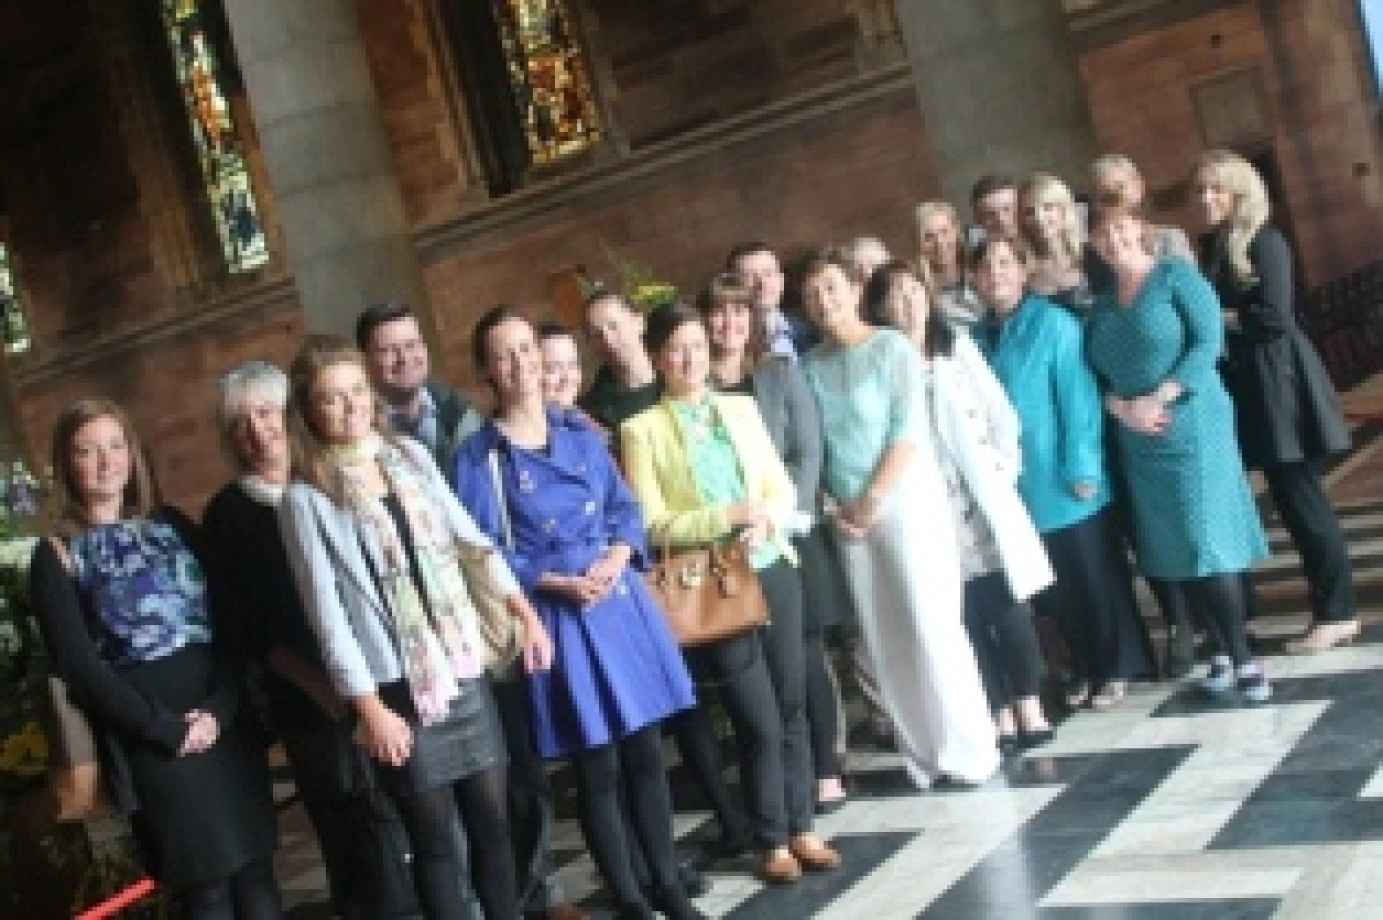 Tourist Board staff take in new visitor experience at St Anne’s